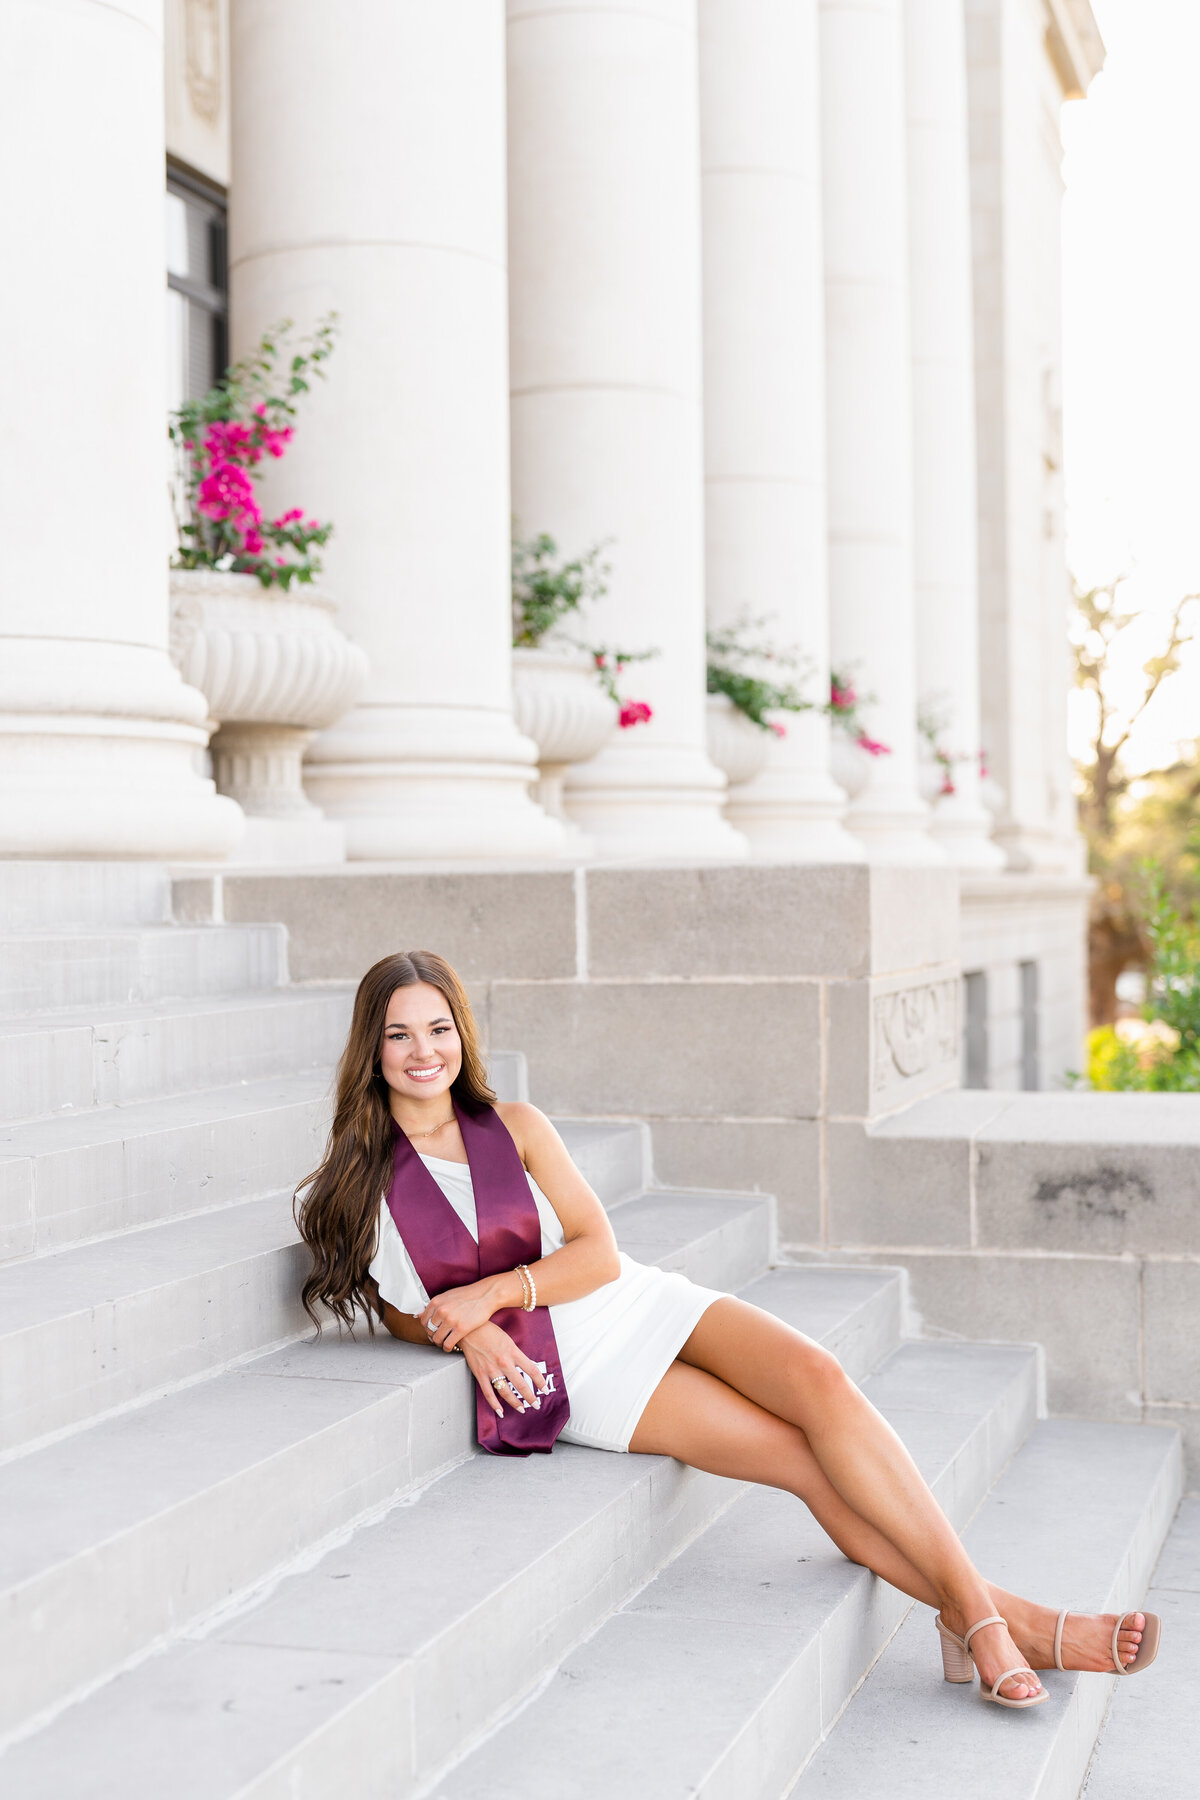 Texas A&M senior girl sitting on Administration Building stairs wearing white dress and maroon stole  while smiling